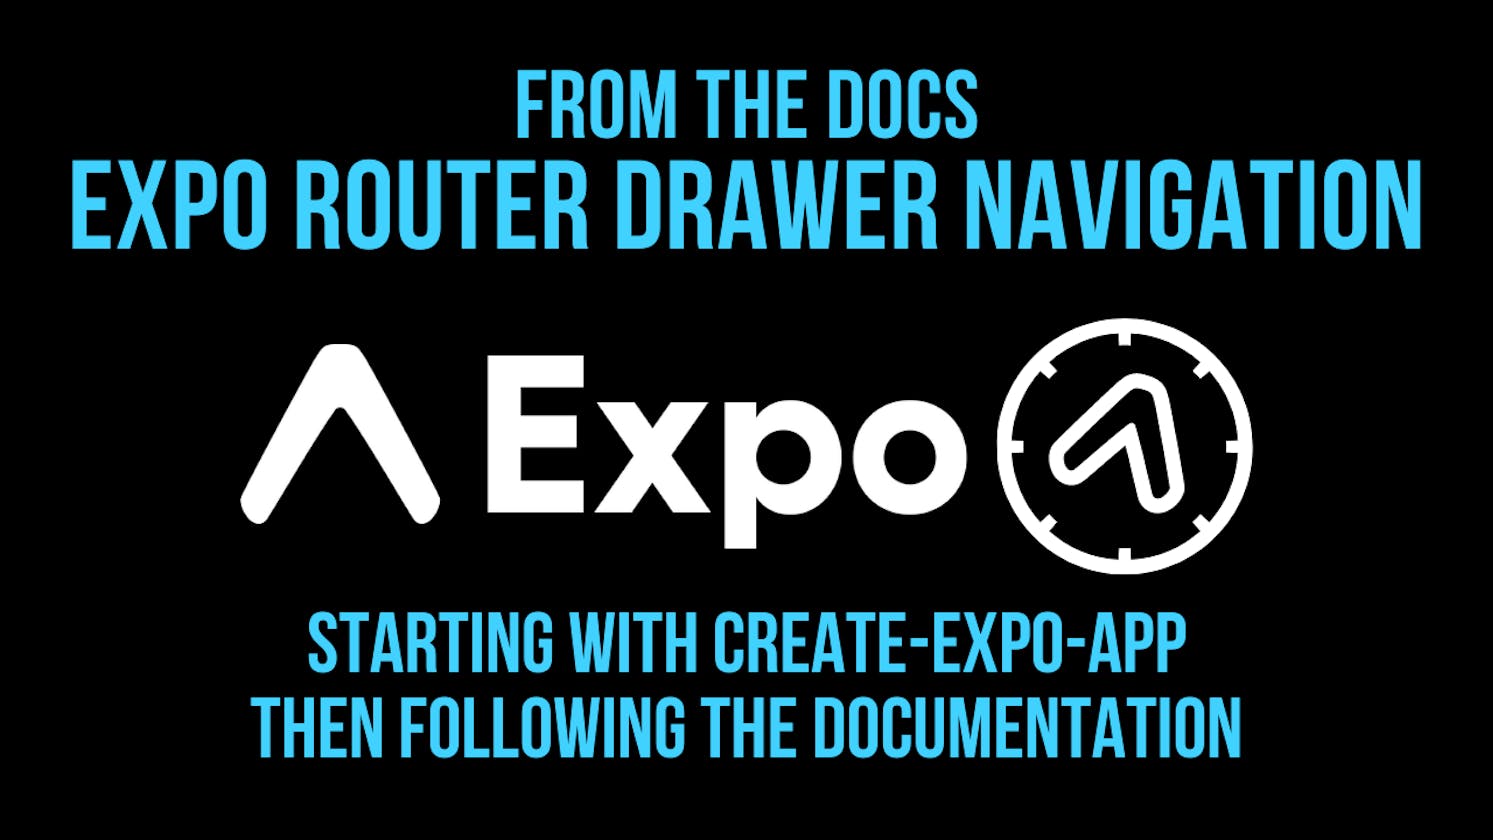 Expo Router Drawer Navigation - From the Docs